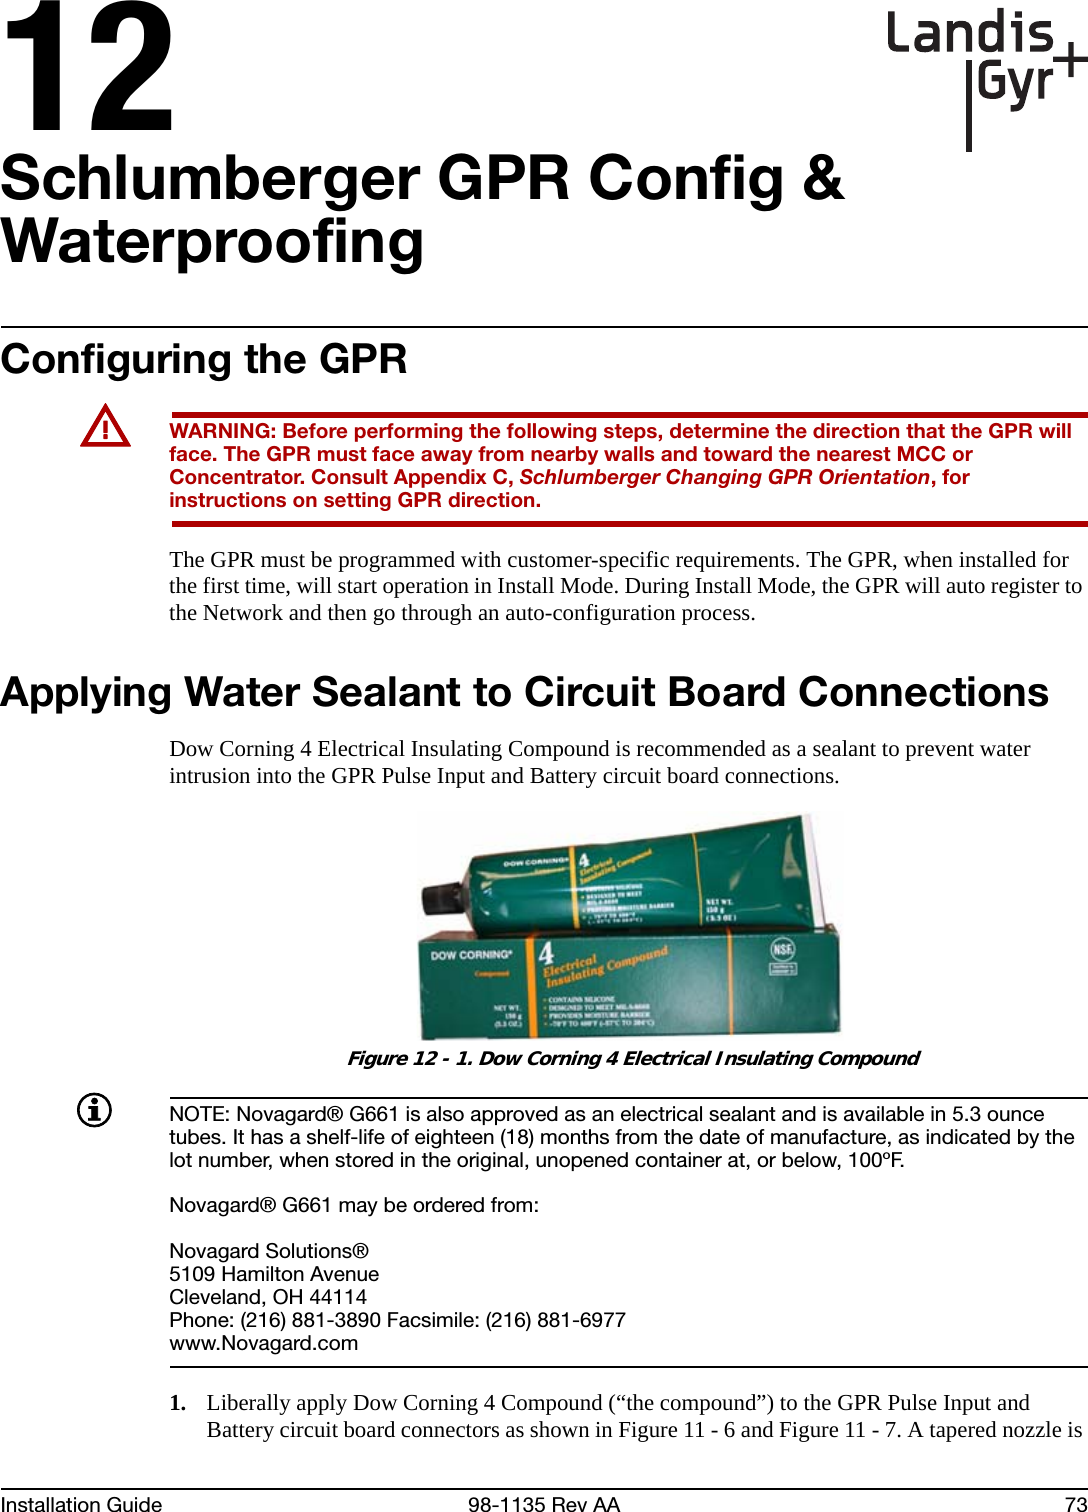 12Installation Guide 98-1135 Rev AA 73Schlumberger GPR Config &amp; WaterproofingConfiguring the GPRUWARNING: Before performing the following steps, determine the direction that the GPR will face. The GPR must face away from nearby walls and toward the nearest MCC or Concentrator. Consult Appendix C, Schlumberger Changing GPR Orientation, for instructions on setting GPR direction.The GPR must be programmed with customer-specific requirements. The GPR, when installed for the first time, will start operation in Install Mode. During Install Mode, the GPR will auto register to the Network and then go through an auto-configuration process.Applying Water Sealant to Circuit Board Connections Dow Corning 4 Electrical Insulating Compound is recommended as a sealant to prevent water intrusion into the GPR Pulse Input and Battery circuit board connections. Figure 12 - 1. Dow Corning 4 Electrical Insulating CompoundNOTE: Novagard® G661 is also approved as an electrical sealant and is available in 5.3 ounce tubes. It has a shelf-life of eighteen (18) months from the date of manufacture, as indicated by the lot number, when stored in the original, unopened container at, or below, 100ºF.Novagard® G661 may be ordered from:Novagard Solutions®5109 Hamilton AvenueCleveland, OH 44114Phone: (216) 881-3890 Facsimile: (216) 881-6977www.Novagard.com1. Liberally apply Dow Corning 4 Compound (“the compound”) to the GPR Pulse Input and Battery circuit board connectors as shown in Figure 11 - 6 and Figure 11 - 7. A tapered nozzle is 